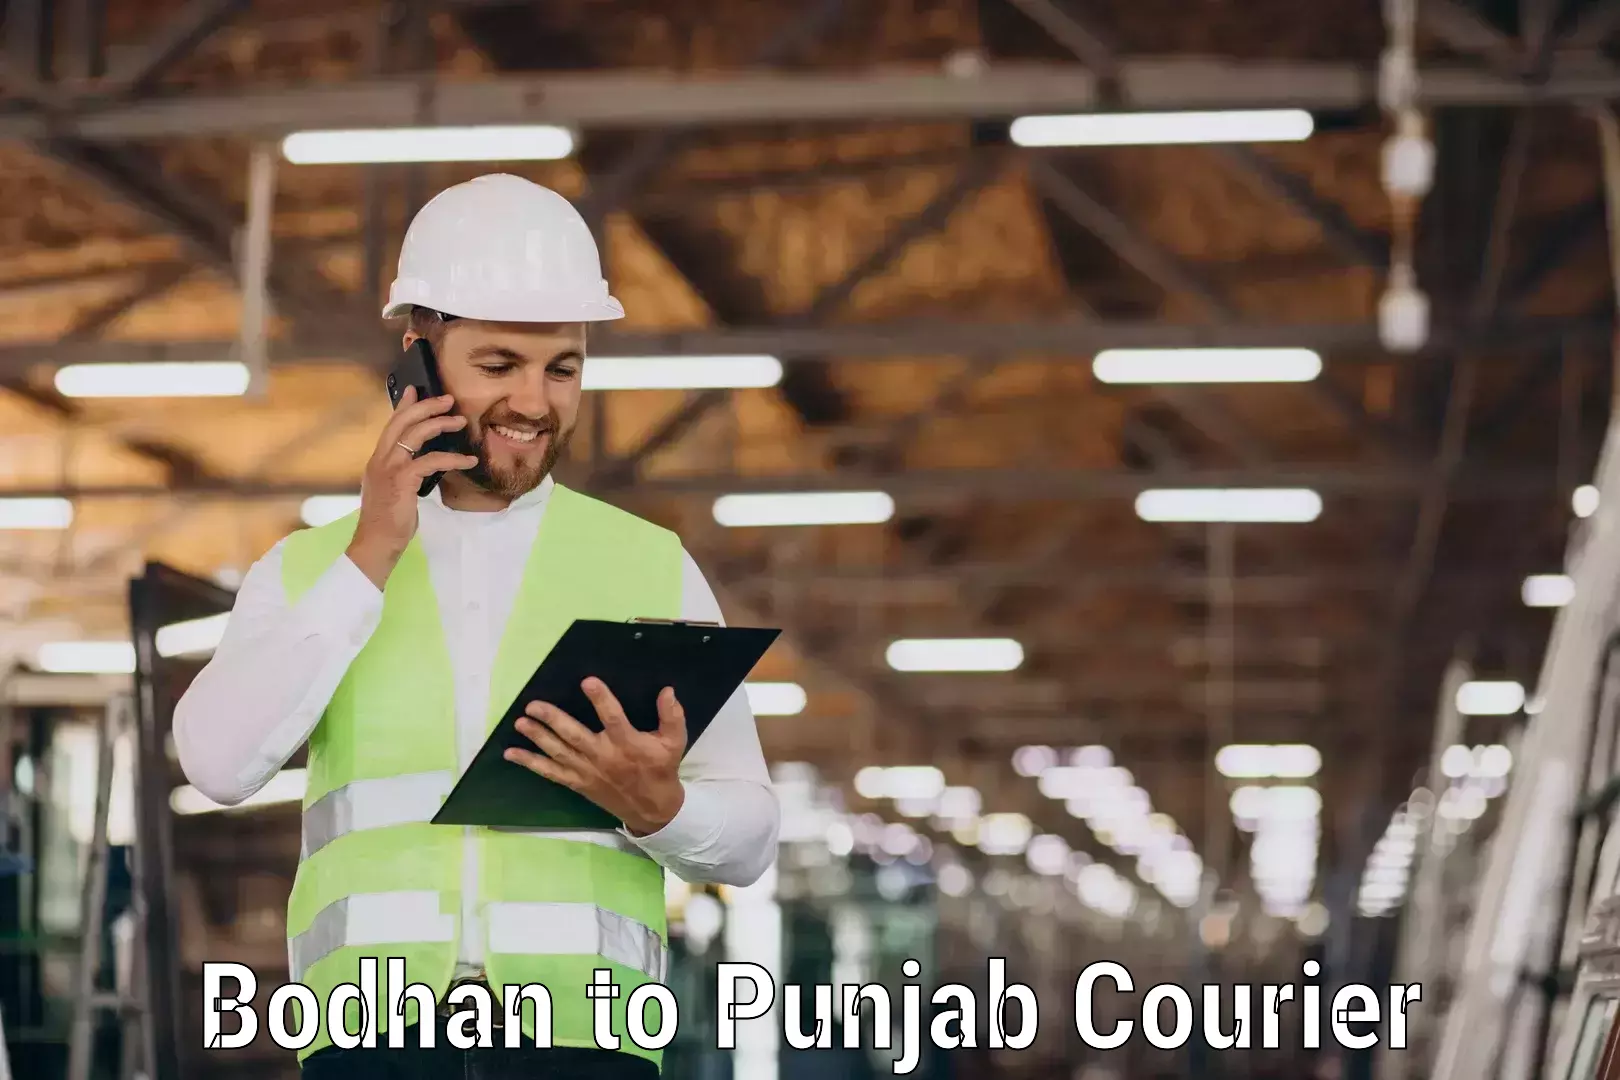 Next-day delivery options Bodhan to Punjab